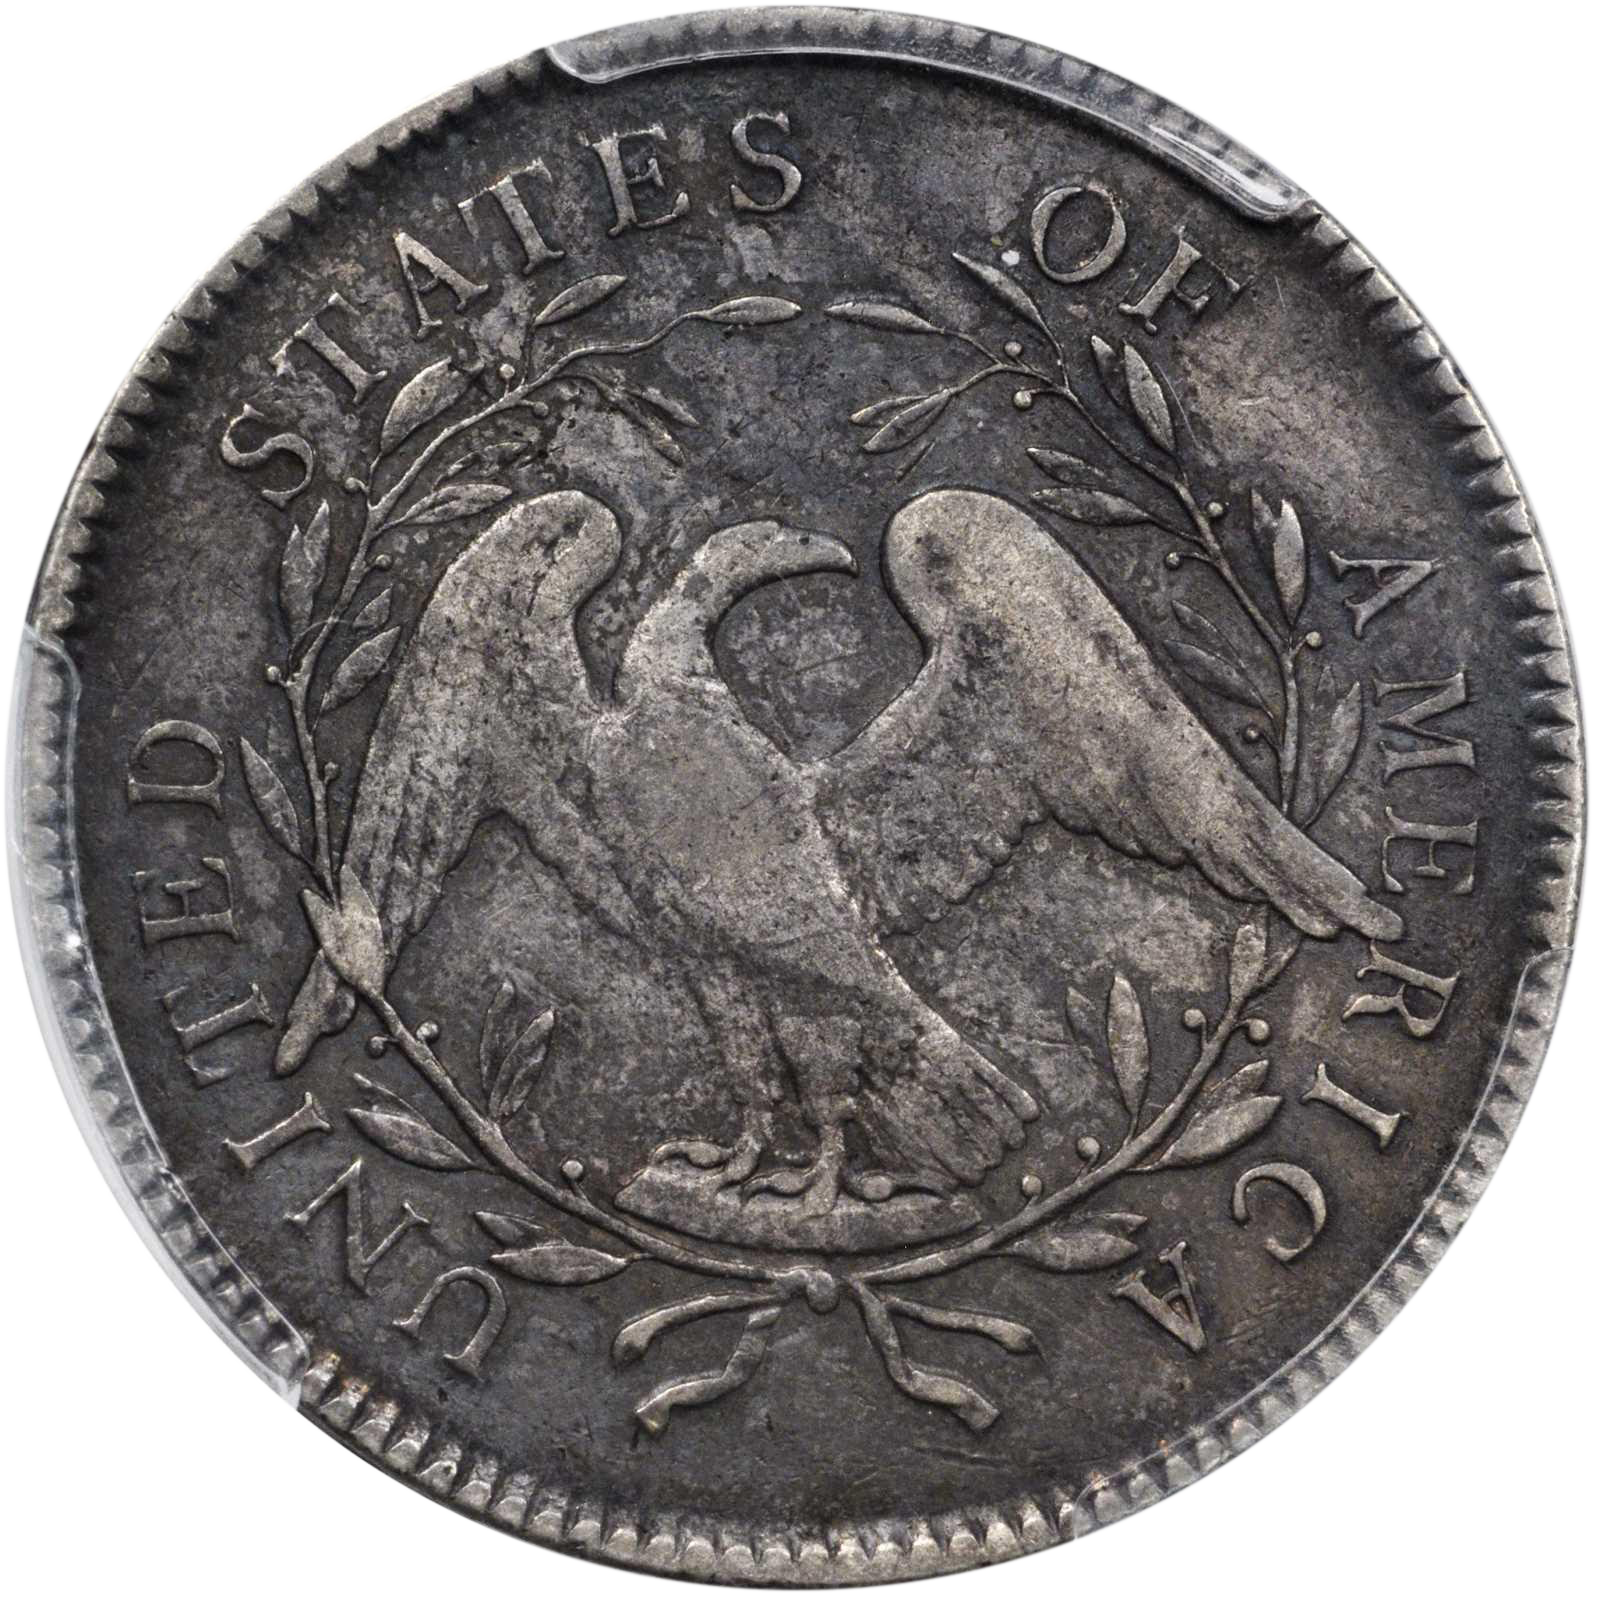 Value Of A Bb Flowing Hair Silver Dollar Rare Coin Buyers